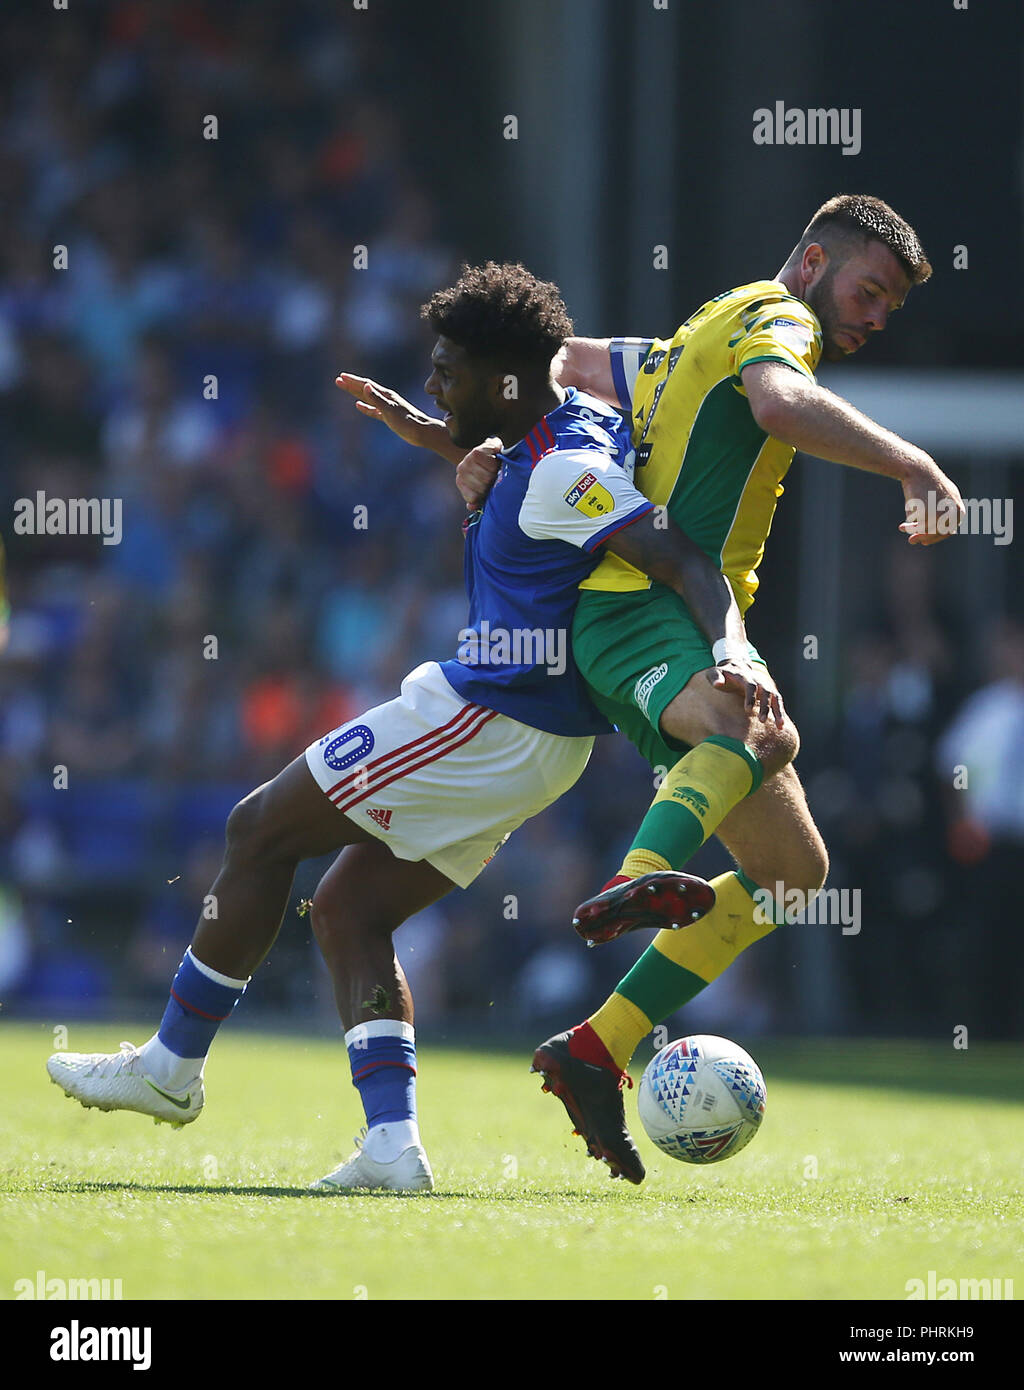 Norwich City's Grant Hanley (right) and Ipswich Town's Ellis Harrison in action during the Sky Bet Championship match at Portman Road, Ipswich. PRESS ASSOCIATION Photo. Picture date: Sunday September 2, 2018. See PA story SOCCER Ipswich. Photo credit should read: Steven Paston/PA Wire. RESTRICTIONS: EDITORIAL USE ONLY No use with unauthorised audio, video, data, fixture lists, club/league logos or 'live' services. Online in-match use limited to 120 images, no video emulation. No use in betting, games or single club/league/player publications. Stock Photo